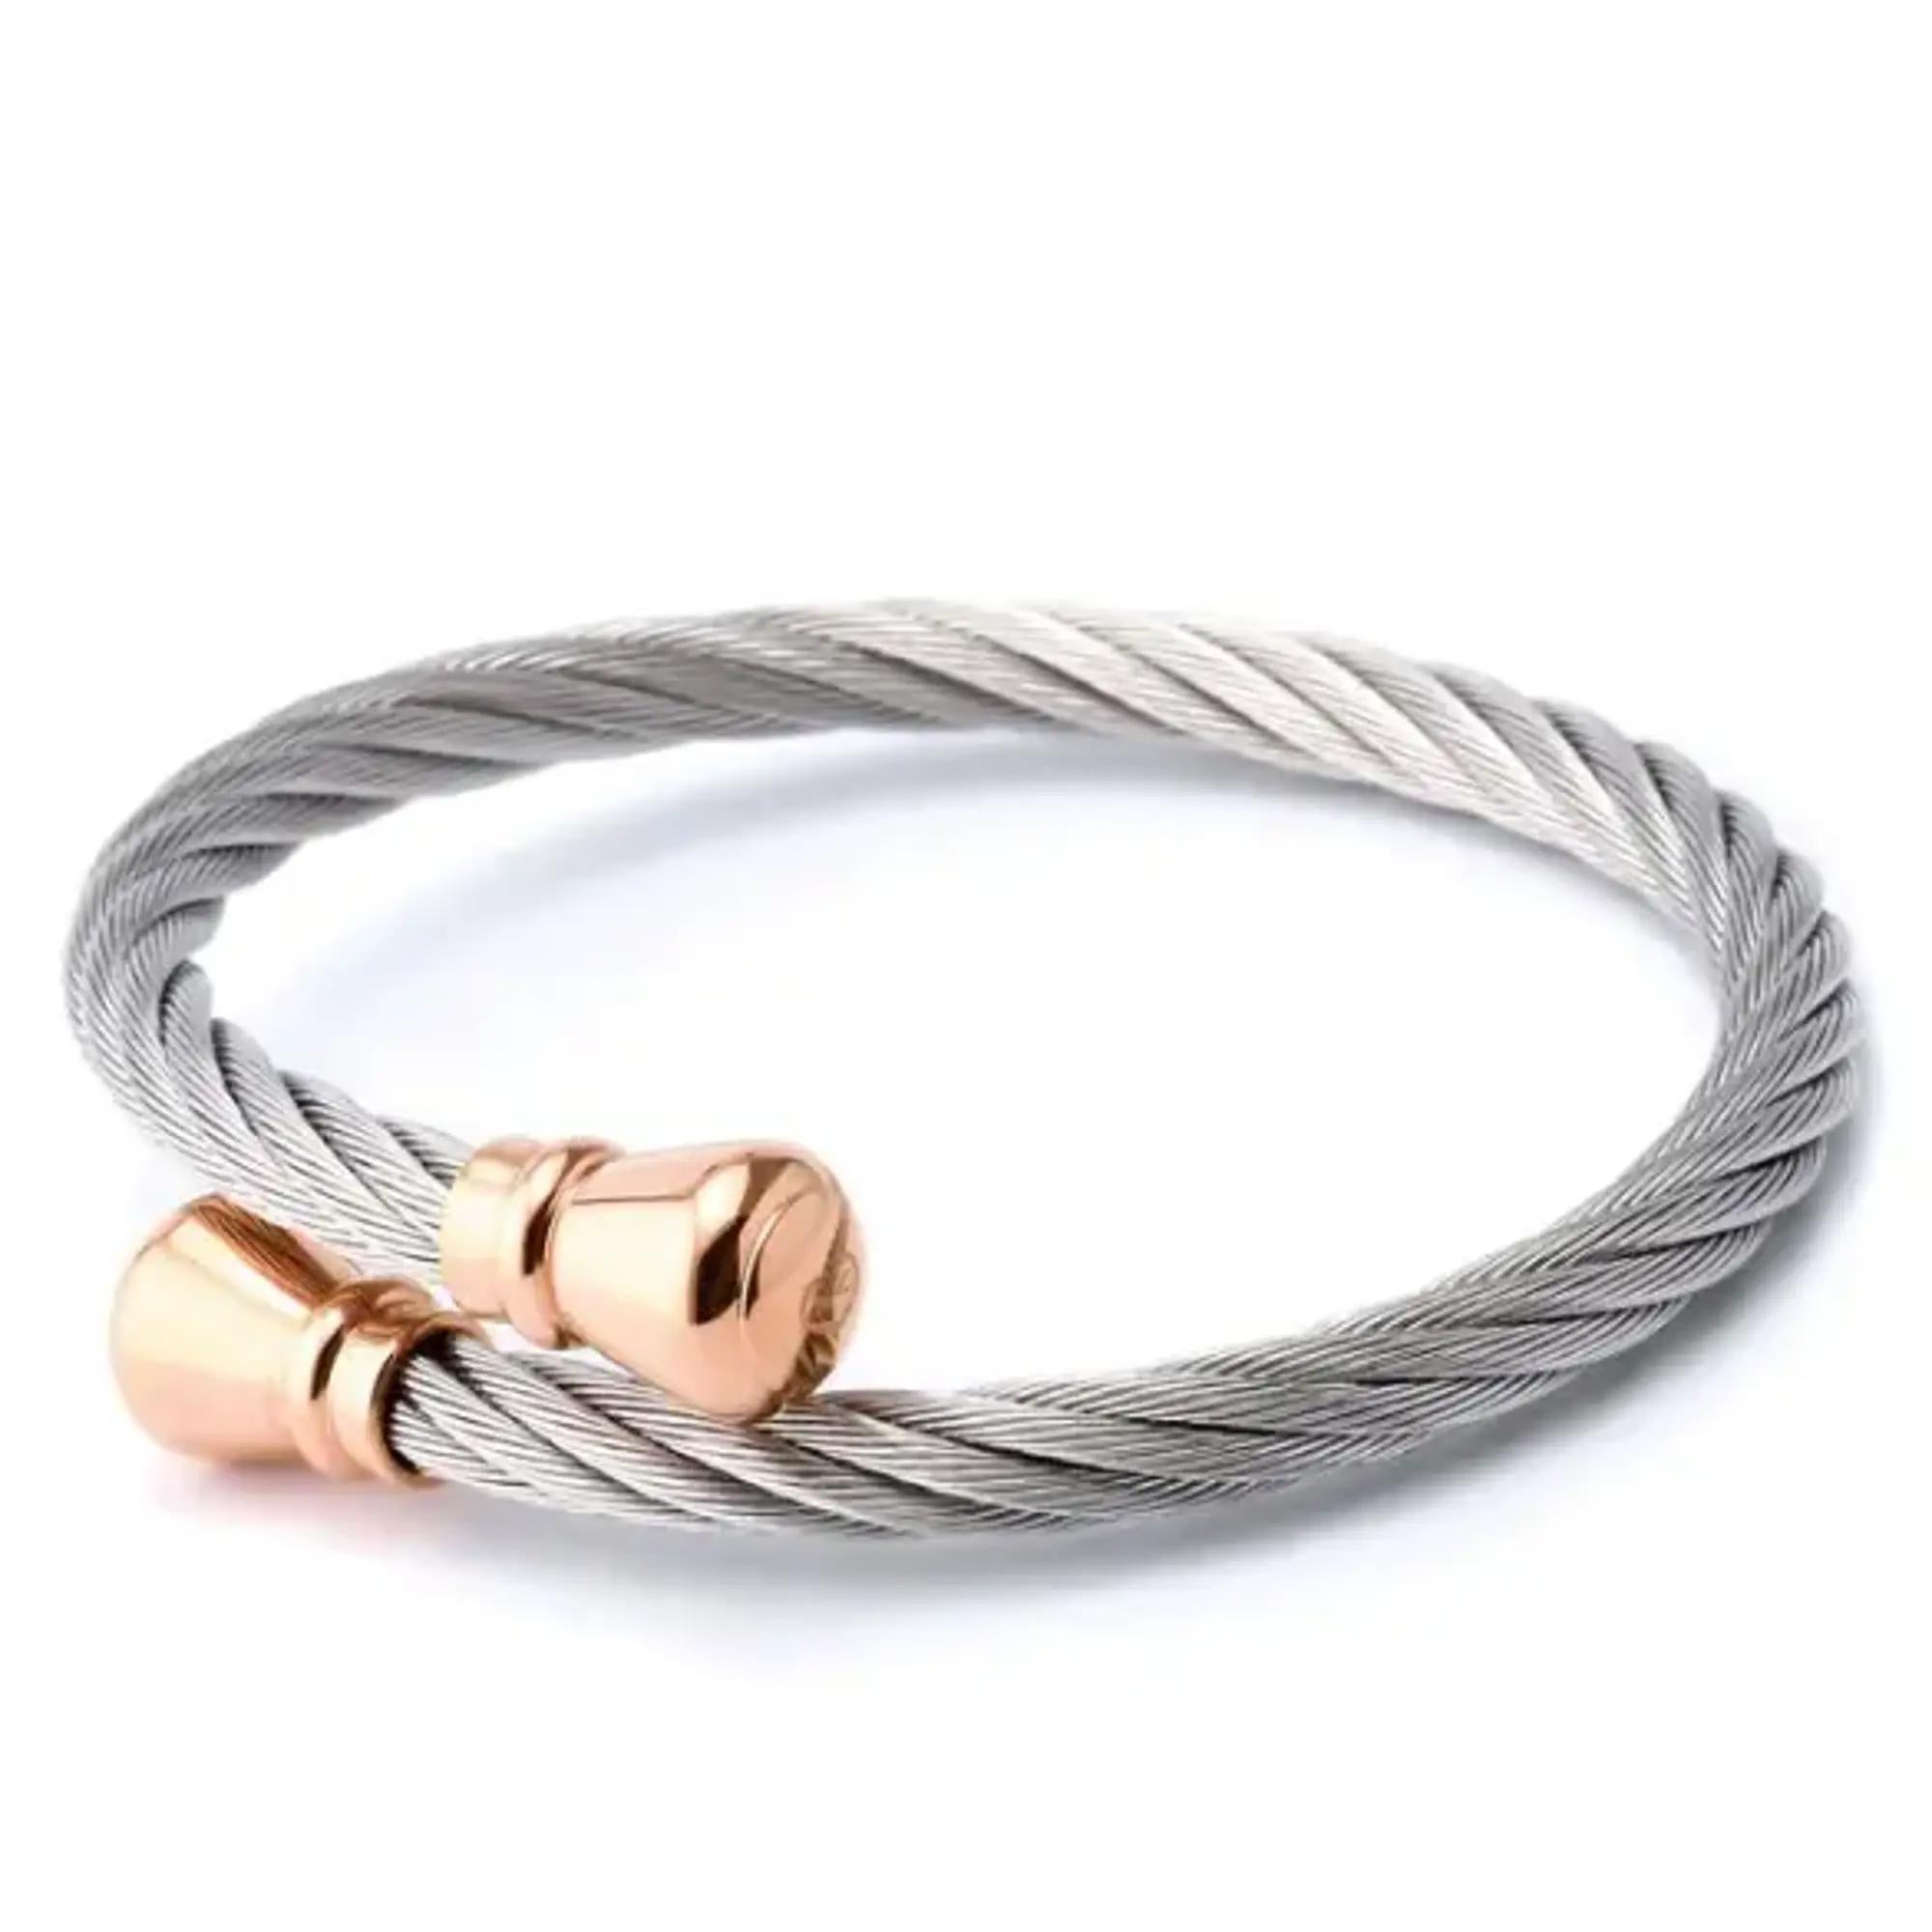 This gorgeous Charriol Celtic Bourse open cuff bangle bracelet is a perfect addition to your everyday look. Super stackable and easy to wear, it features rope style stainless steel bracelet with rose gold color PVD plated ends. Size: Medium. Total